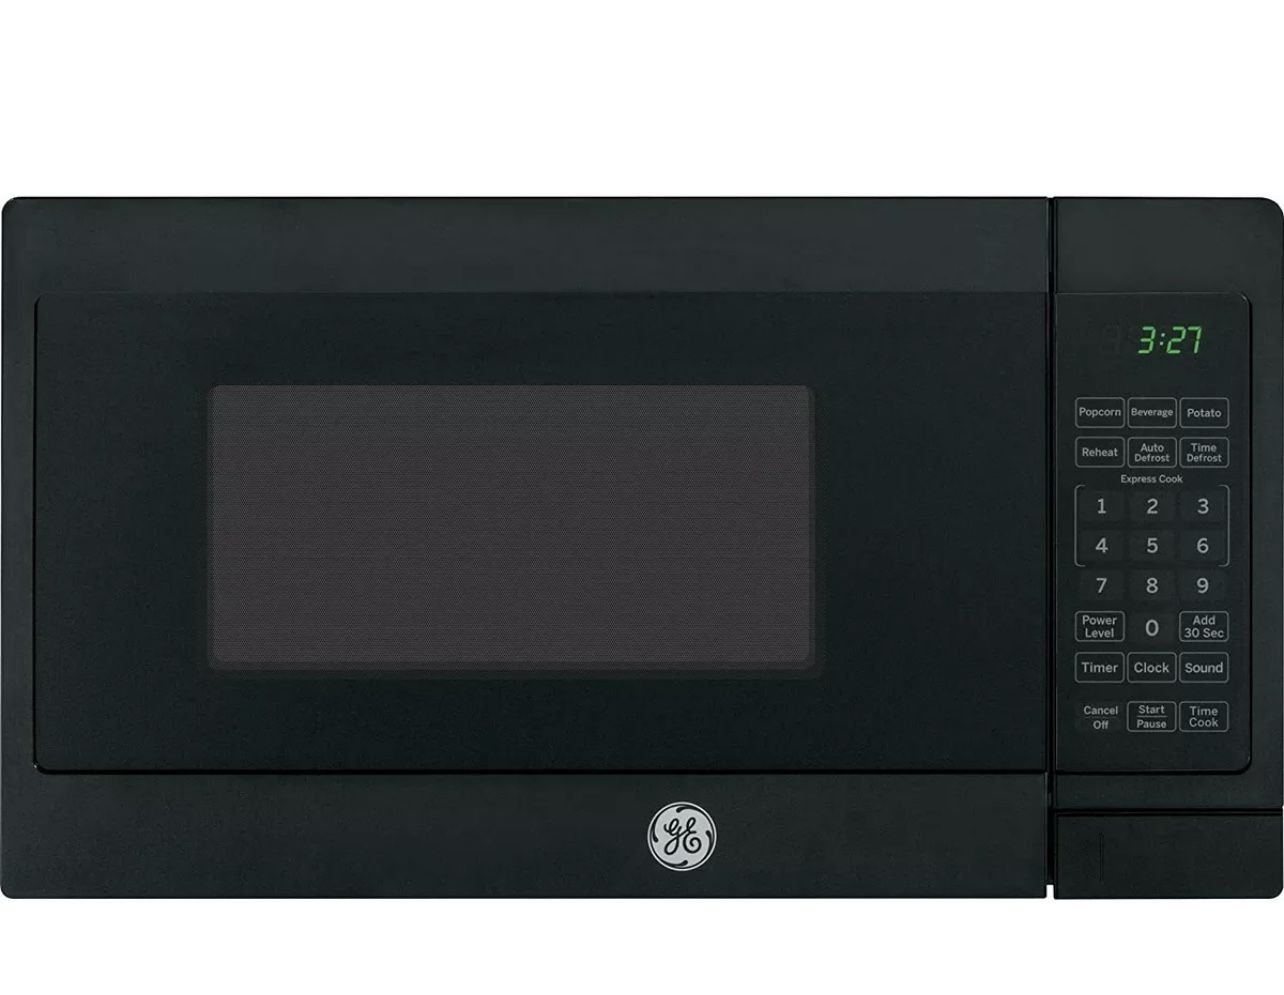 Ge Brand New Microwave For $100 